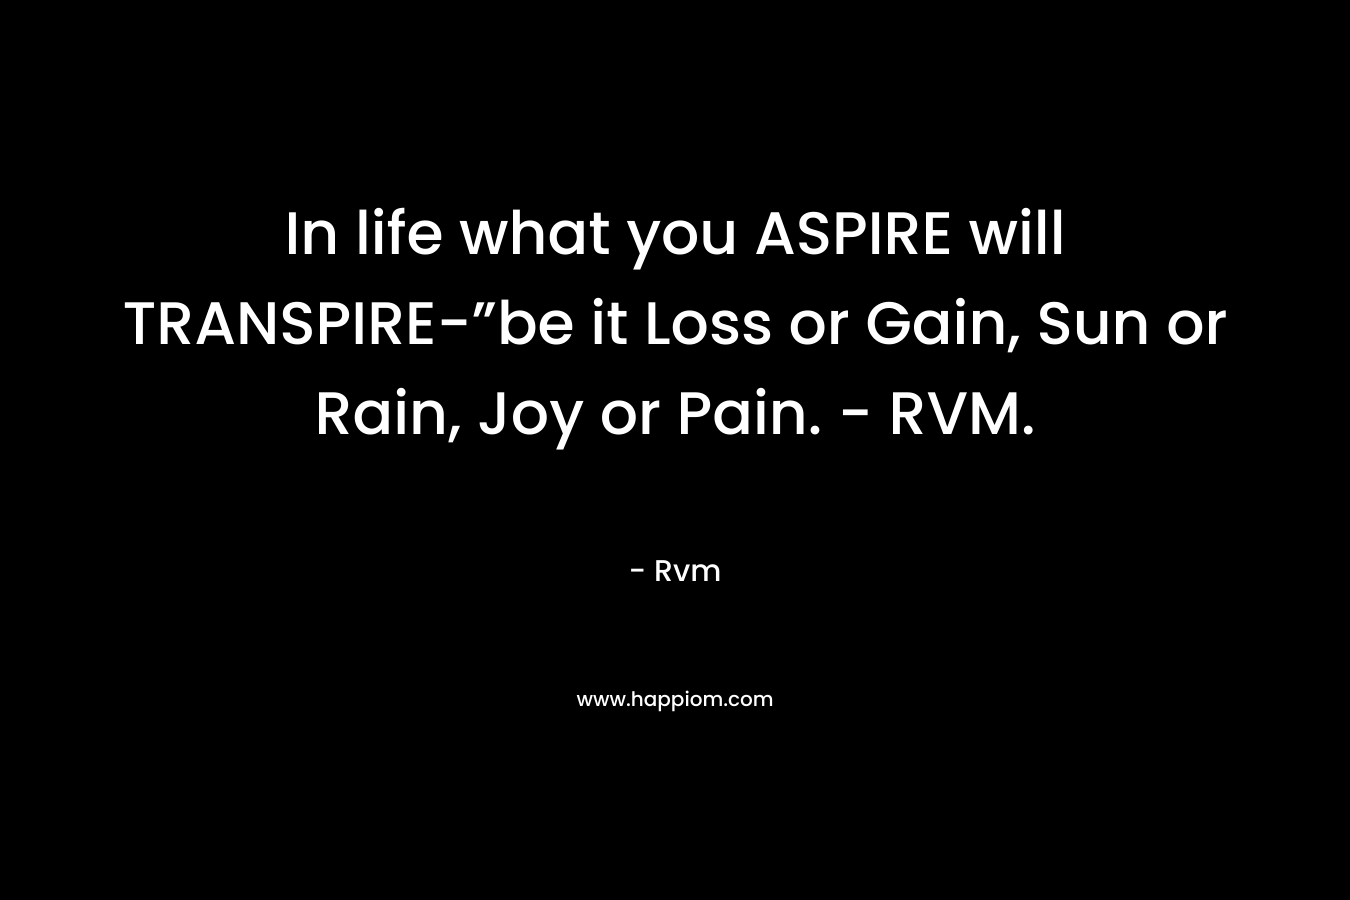 In life what you ASPIRE will TRANSPIRE-”be it Loss or Gain, Sun or Rain, Joy or Pain. – RVM. – Rvm